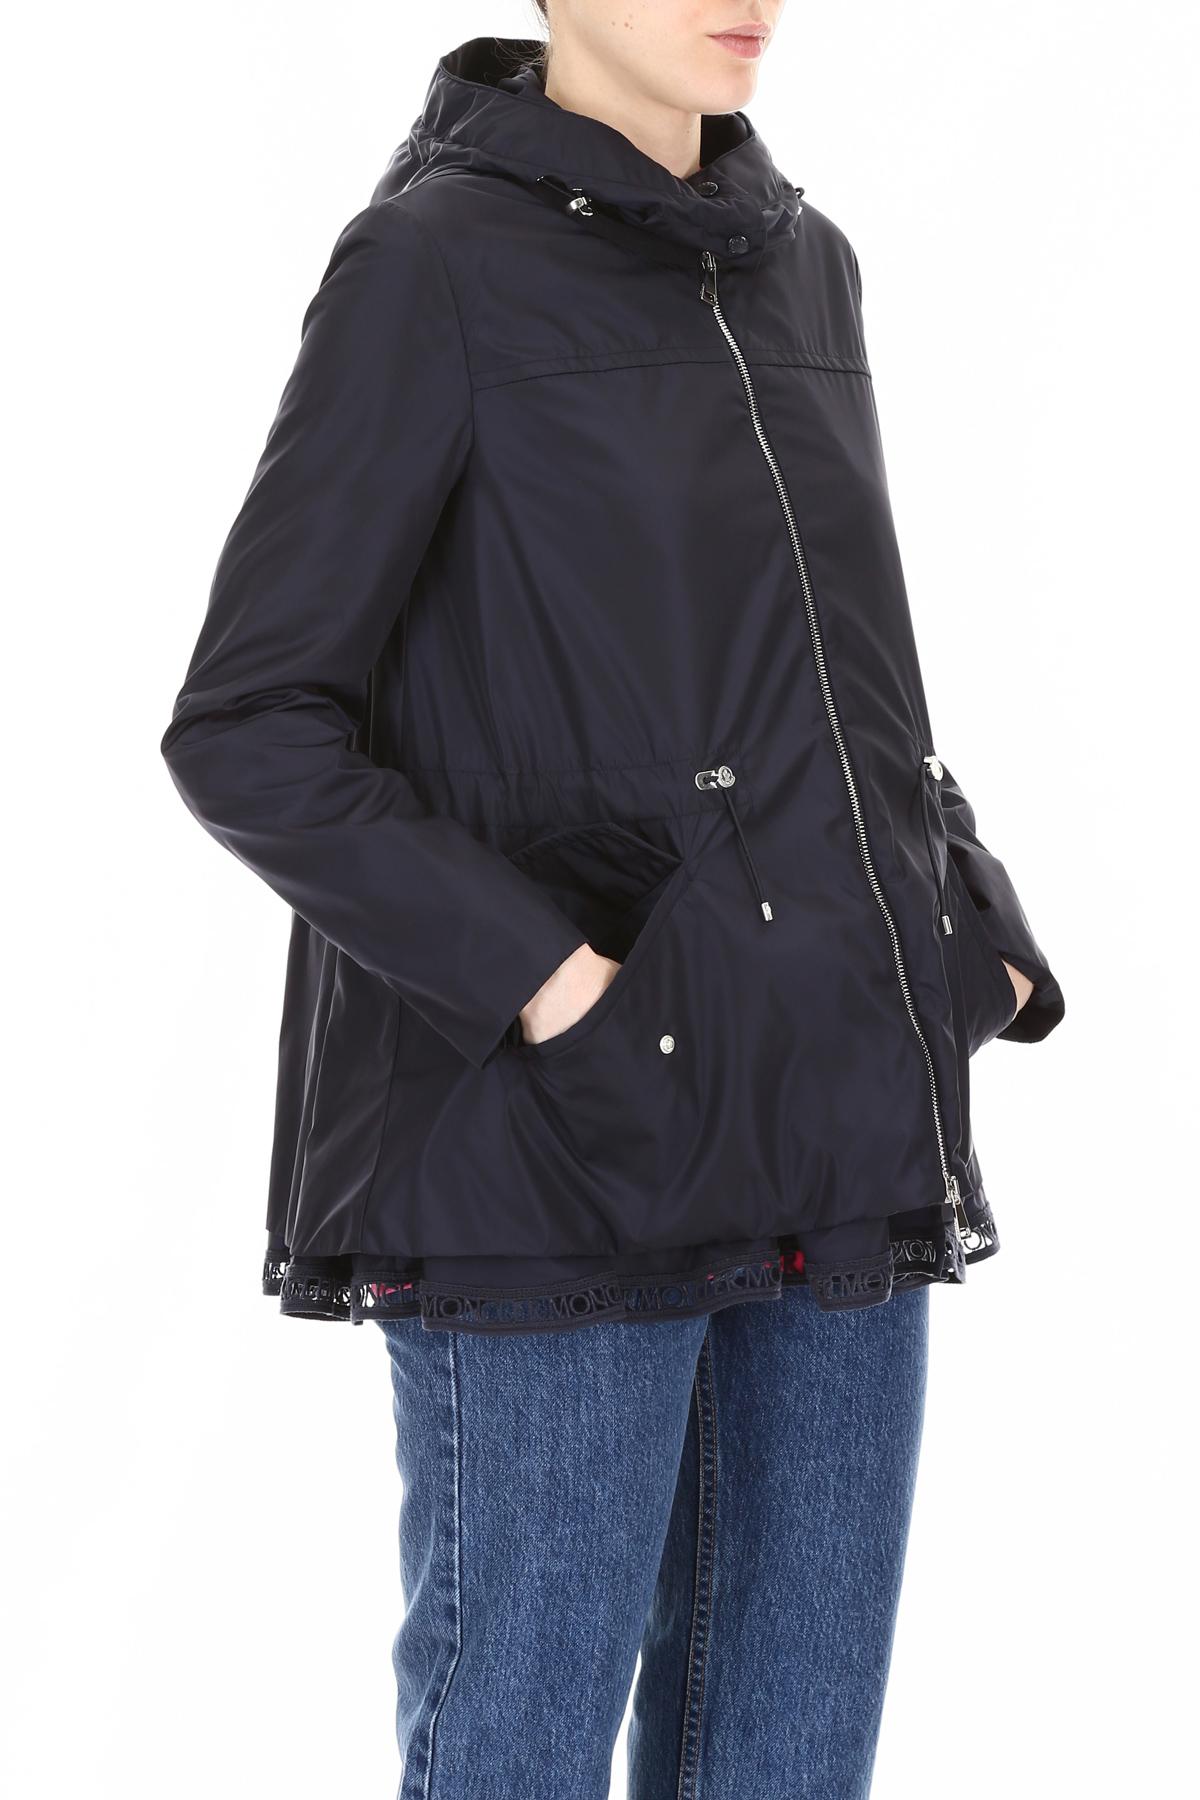 Moncler Synthetic Loty Dark Blue Jacket - Lyst